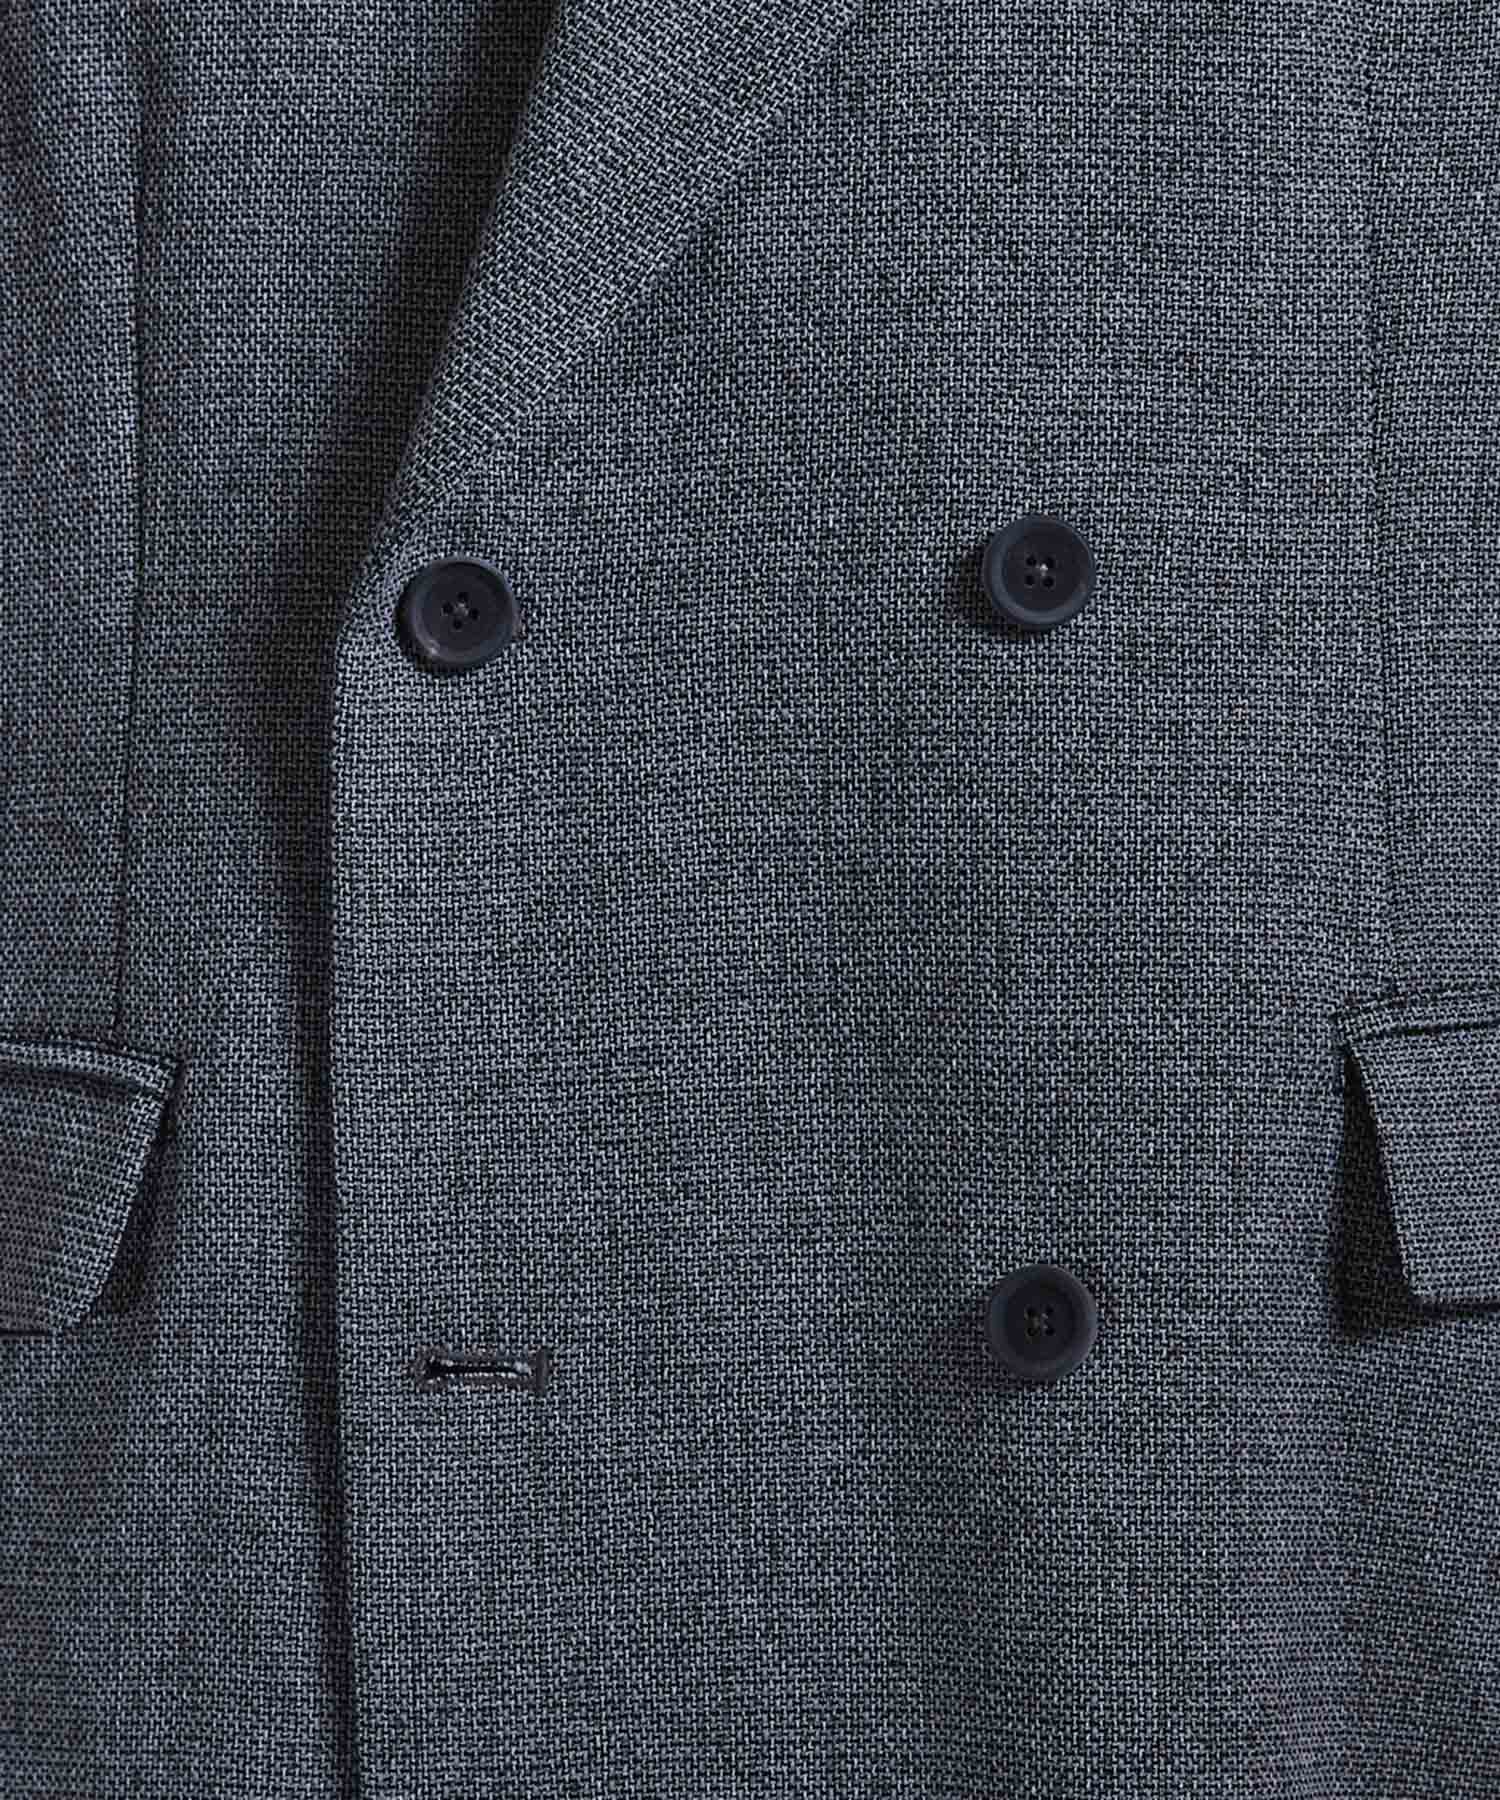 [SALE] TWEED PRIME-OVER DOUBLE TAILORED JACKET